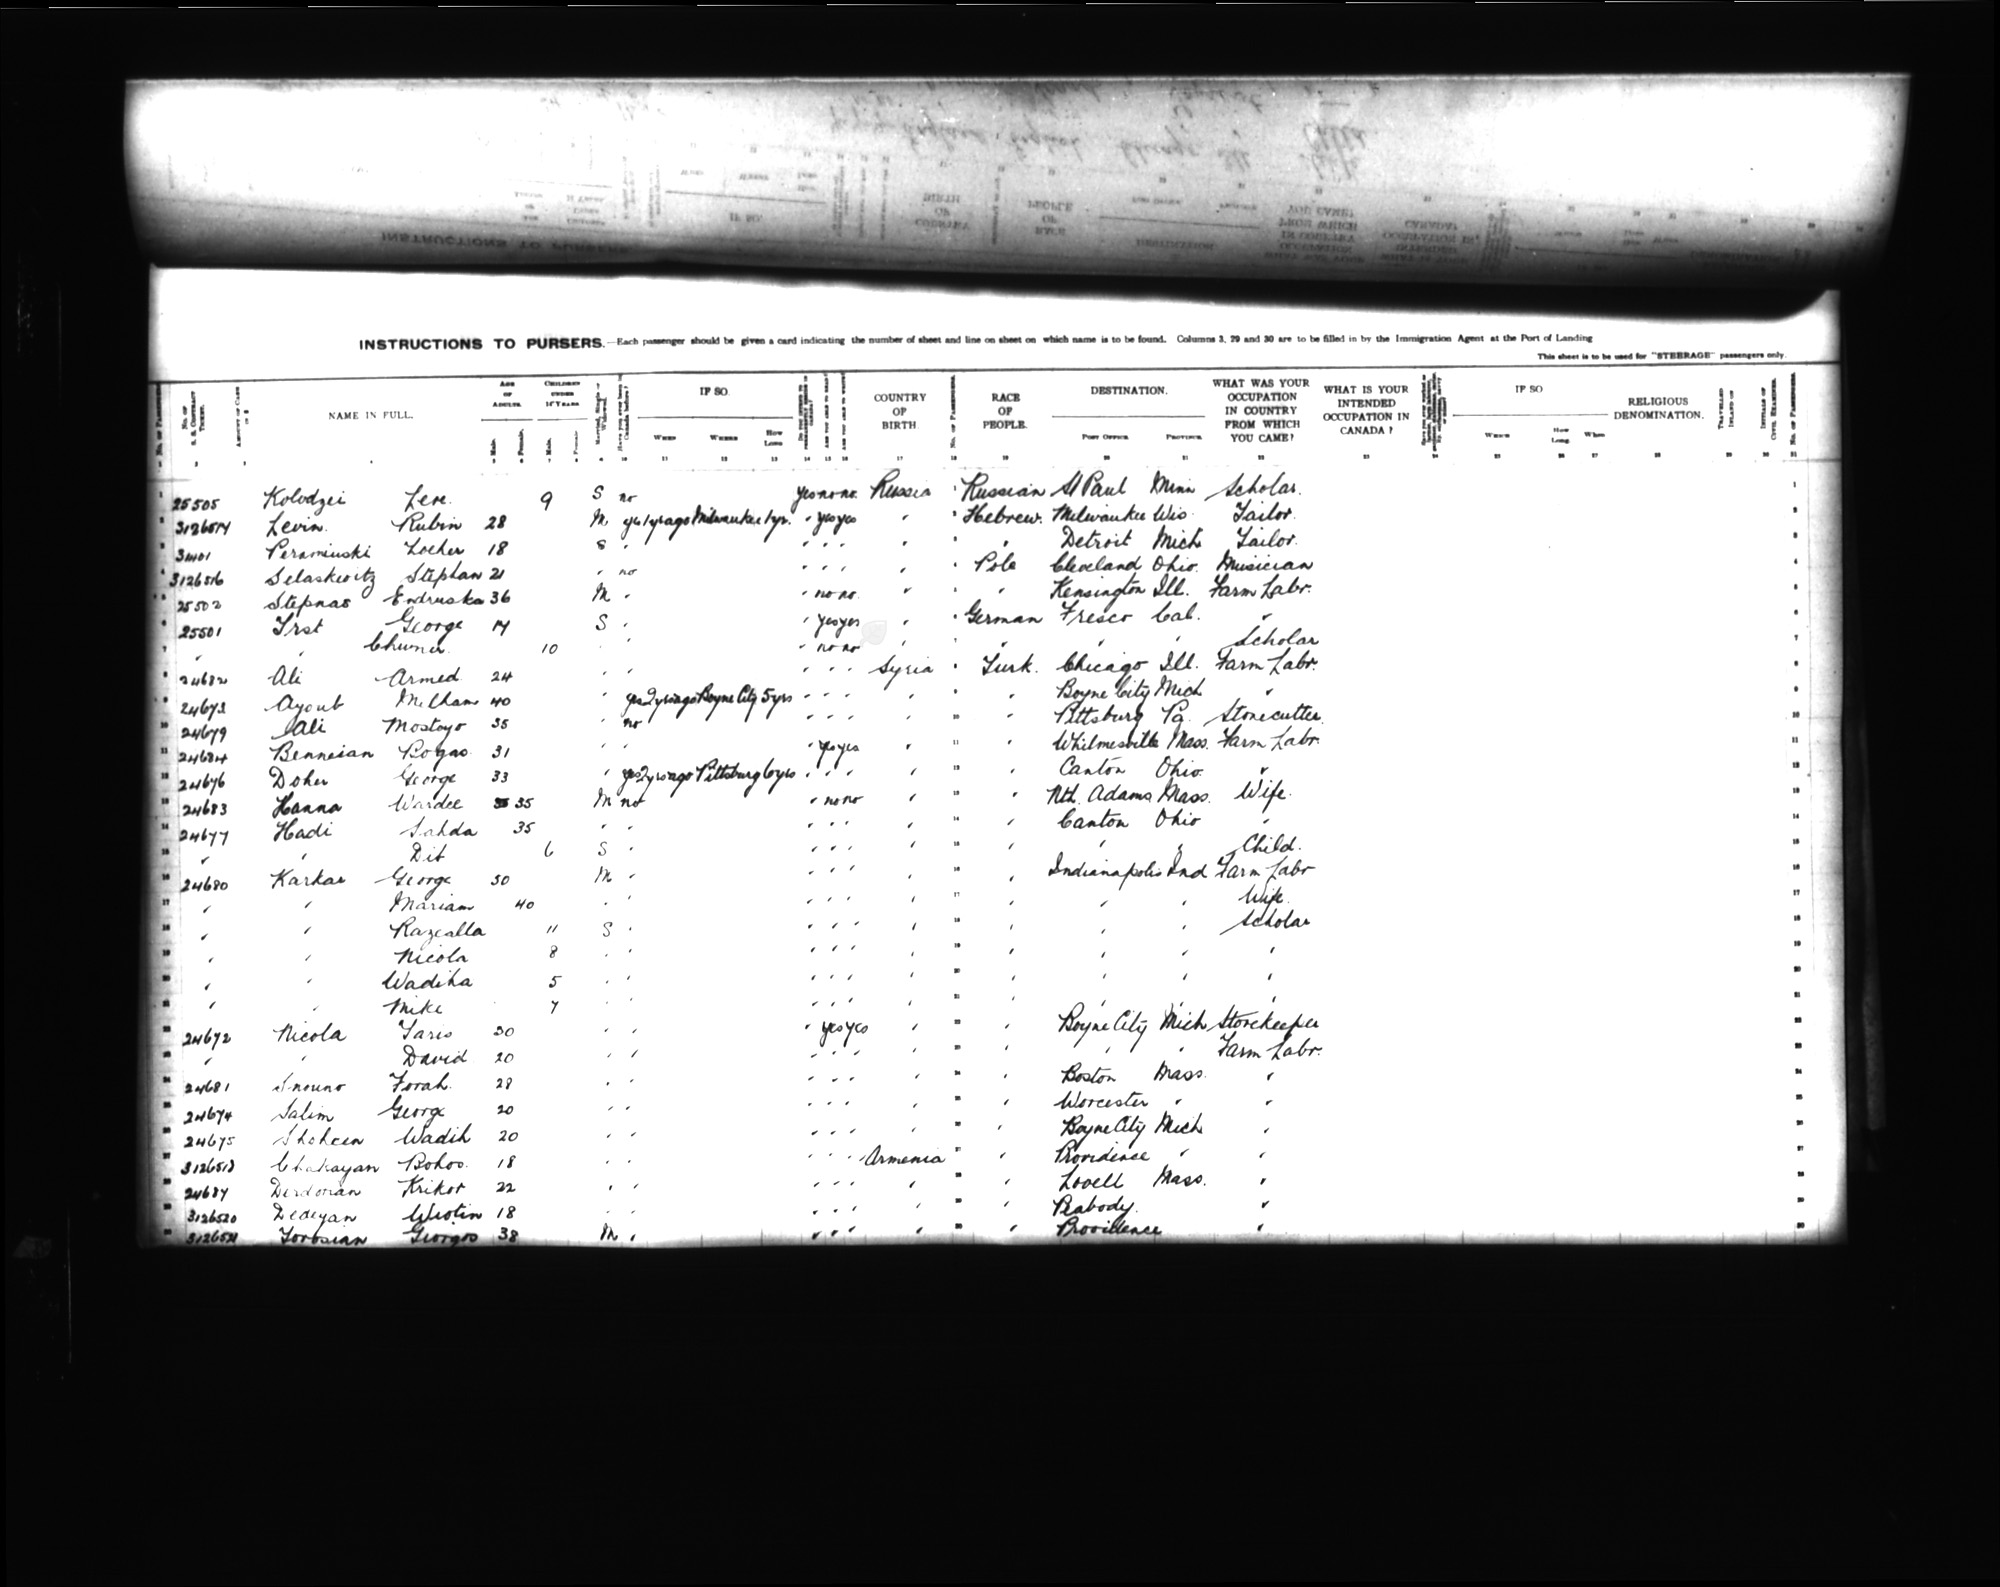 Digitized page of Passenger Lists for Image No.: CANIMM1913PLIST_0000406960-00594